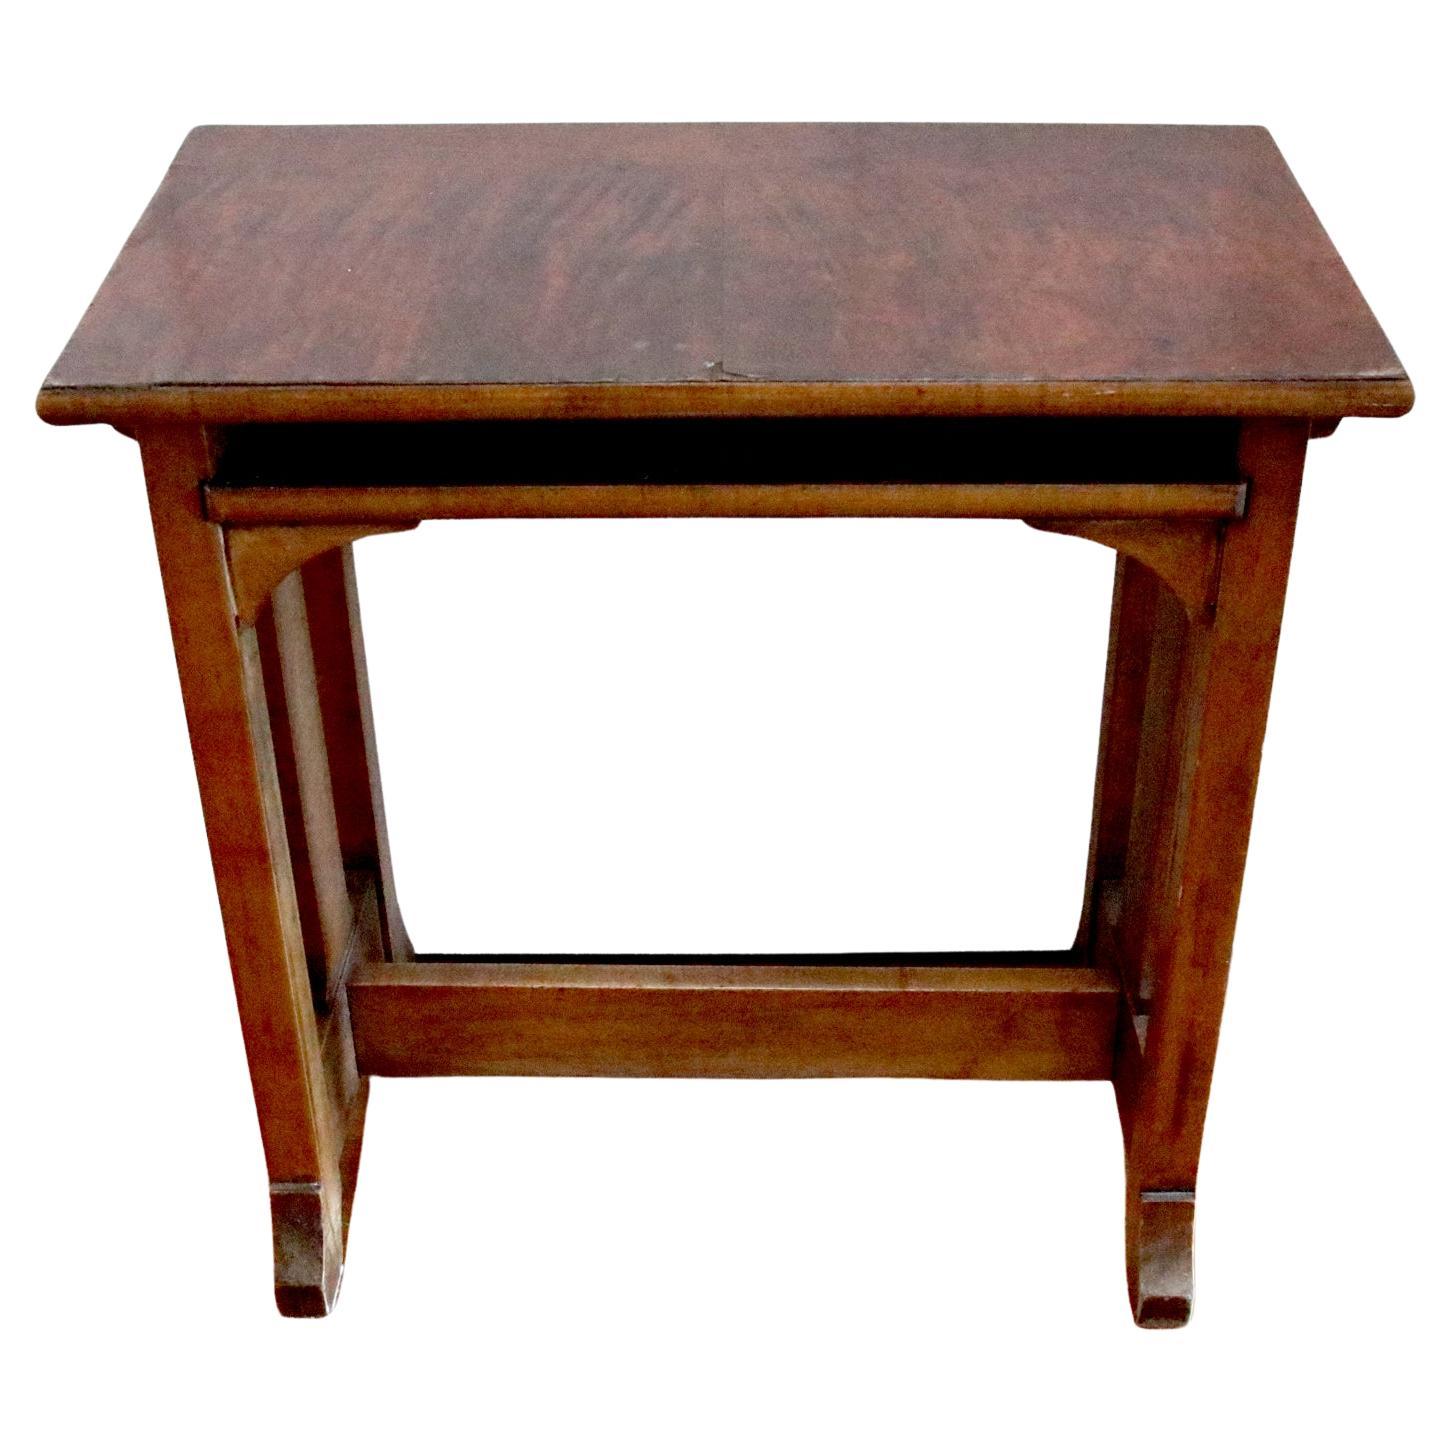 Form and function make this piece of furniture unique. If a piece of furniture could be clever, this desk, bench, altar, pew, would go to the head of the Sunday School class. It is versatile, and if it could speak, it would let us in on its original